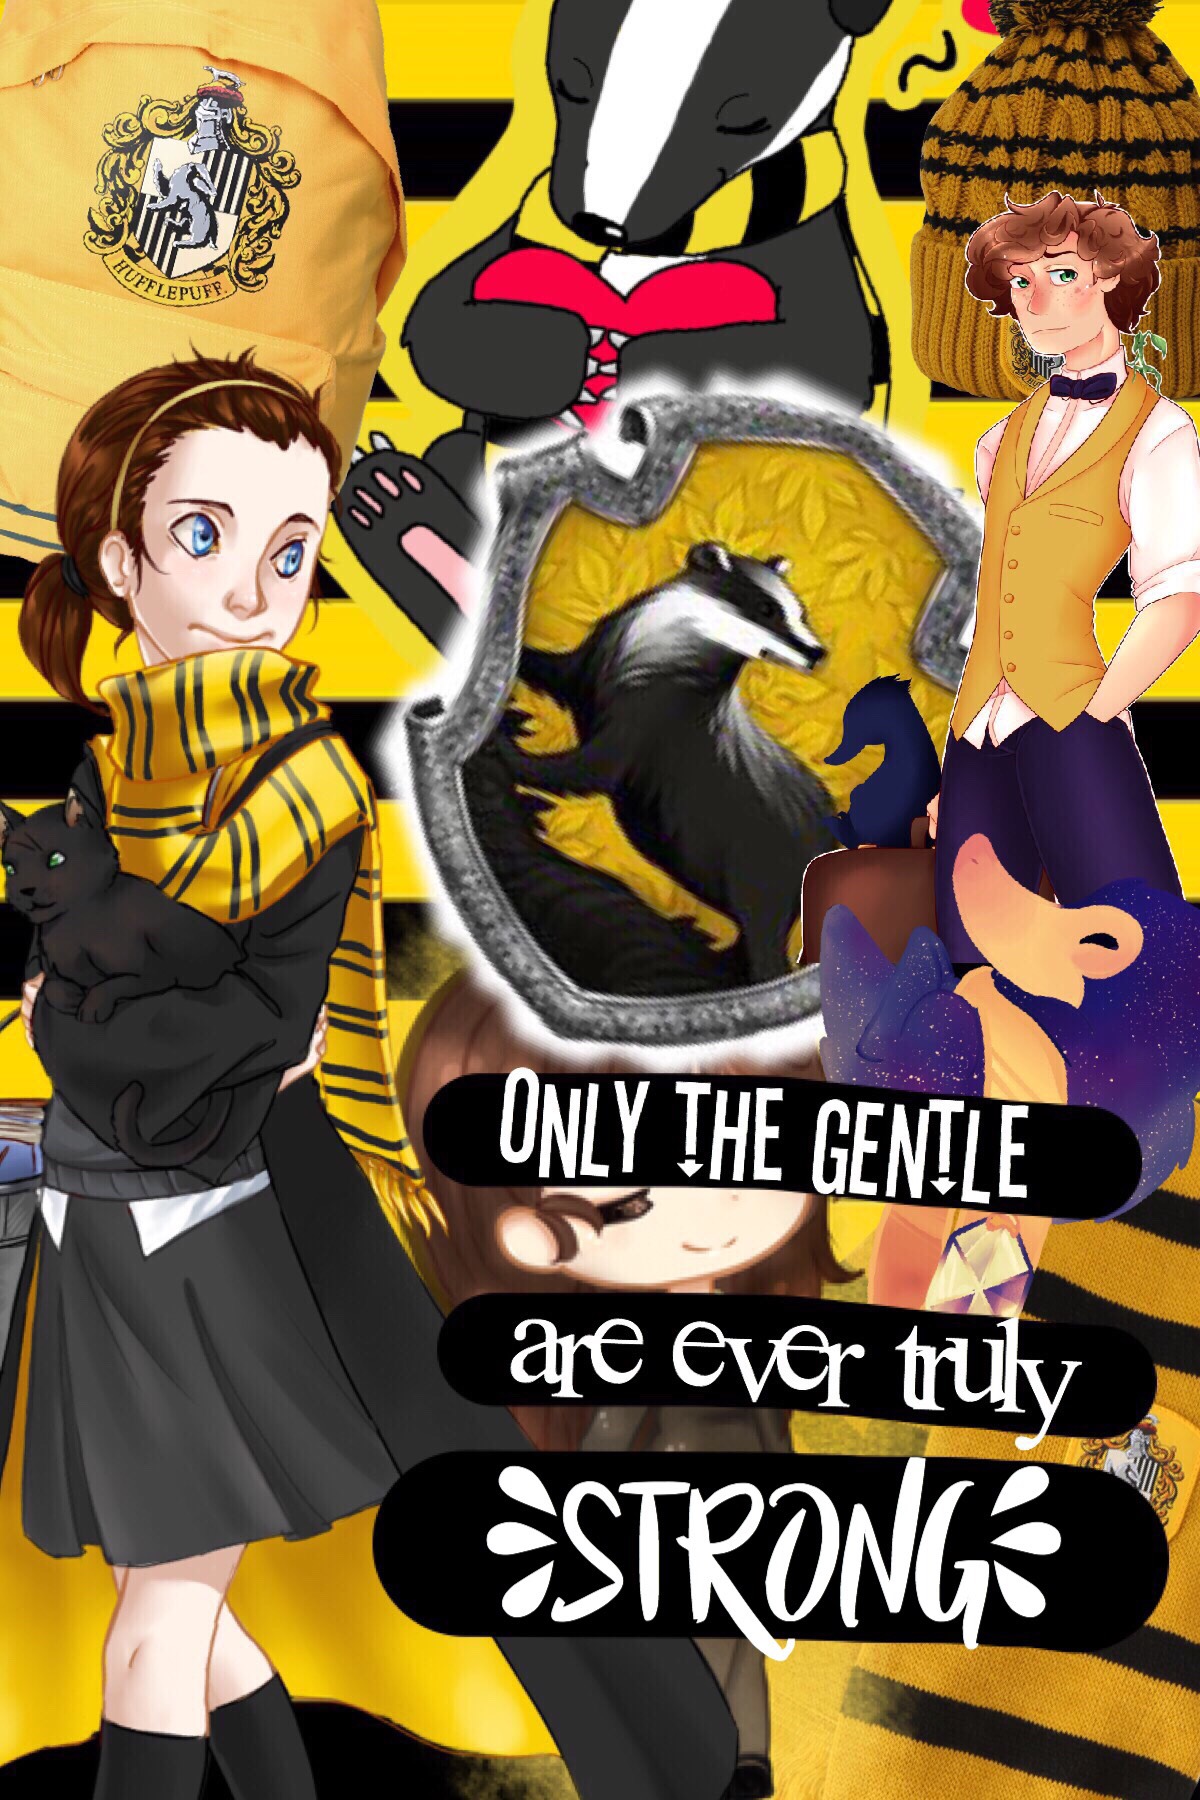 Tappity tap tap

Happy Hufflepuff pride day!
(March 20)

I myself am a proud hufflepuff

I’m going to do collages for other house pride days, which will be over the next 3 days.

Qotp: What house are you in?